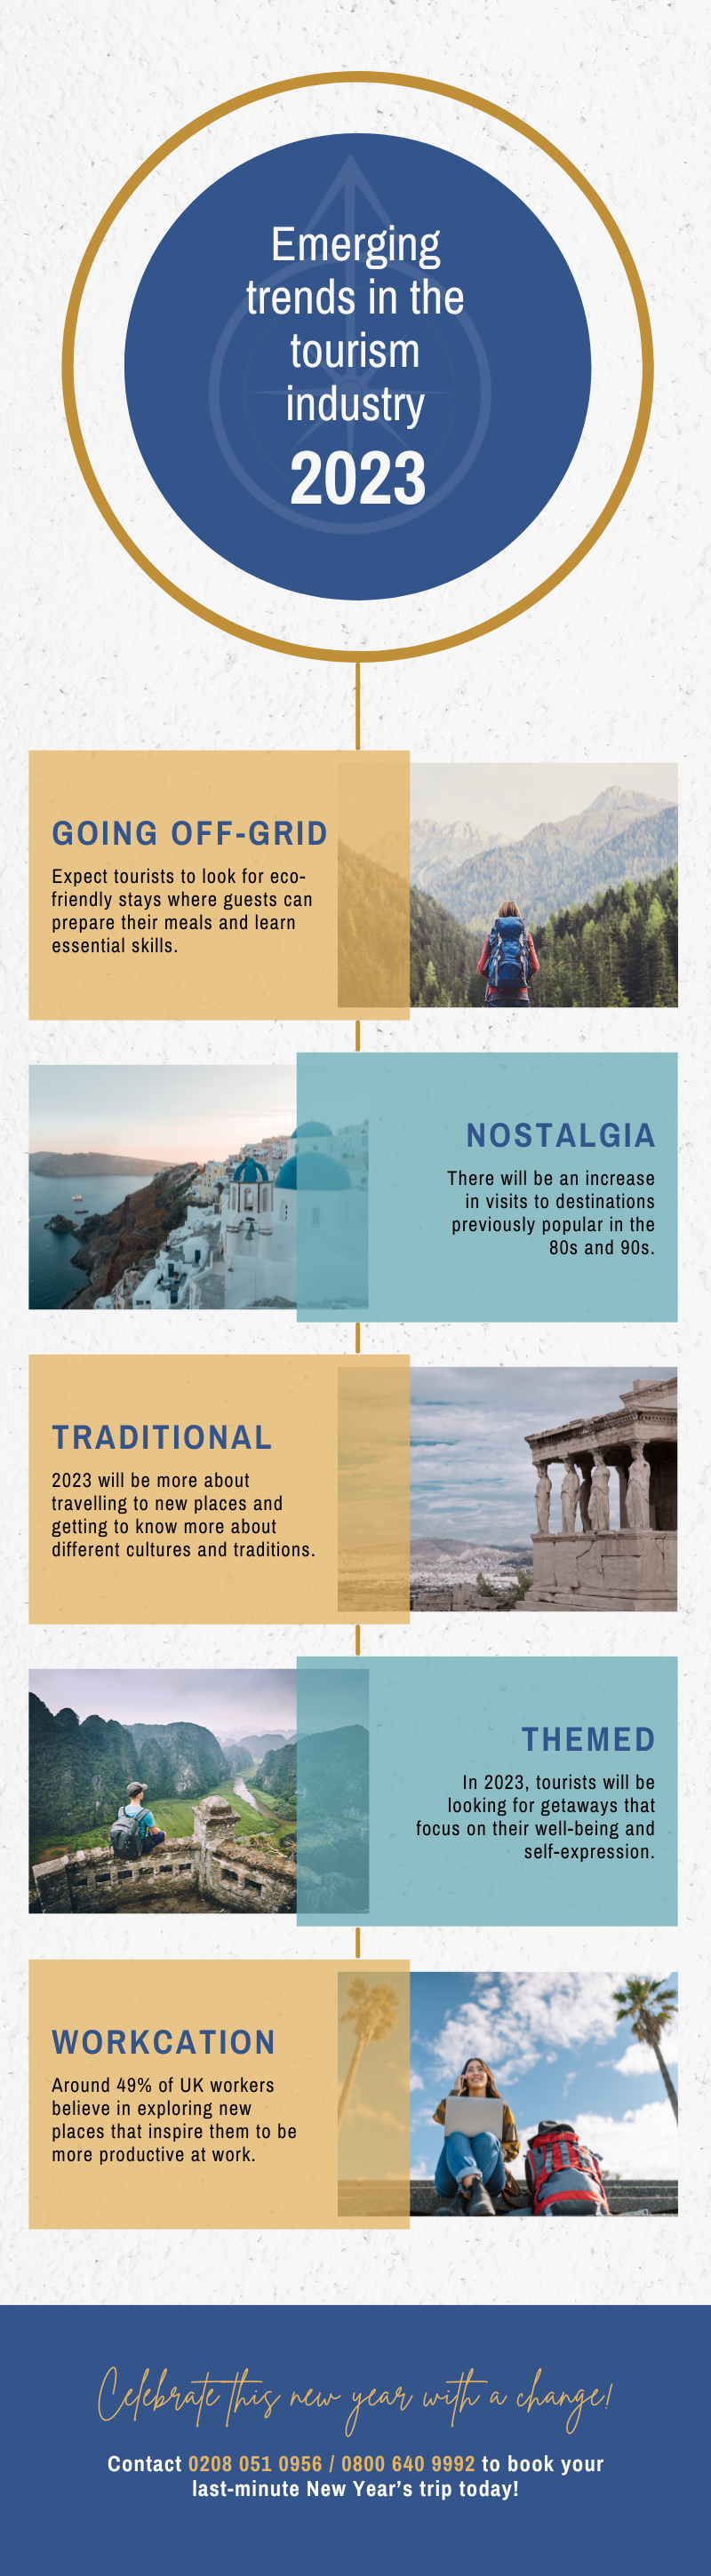 Tourism Trends Infographic 